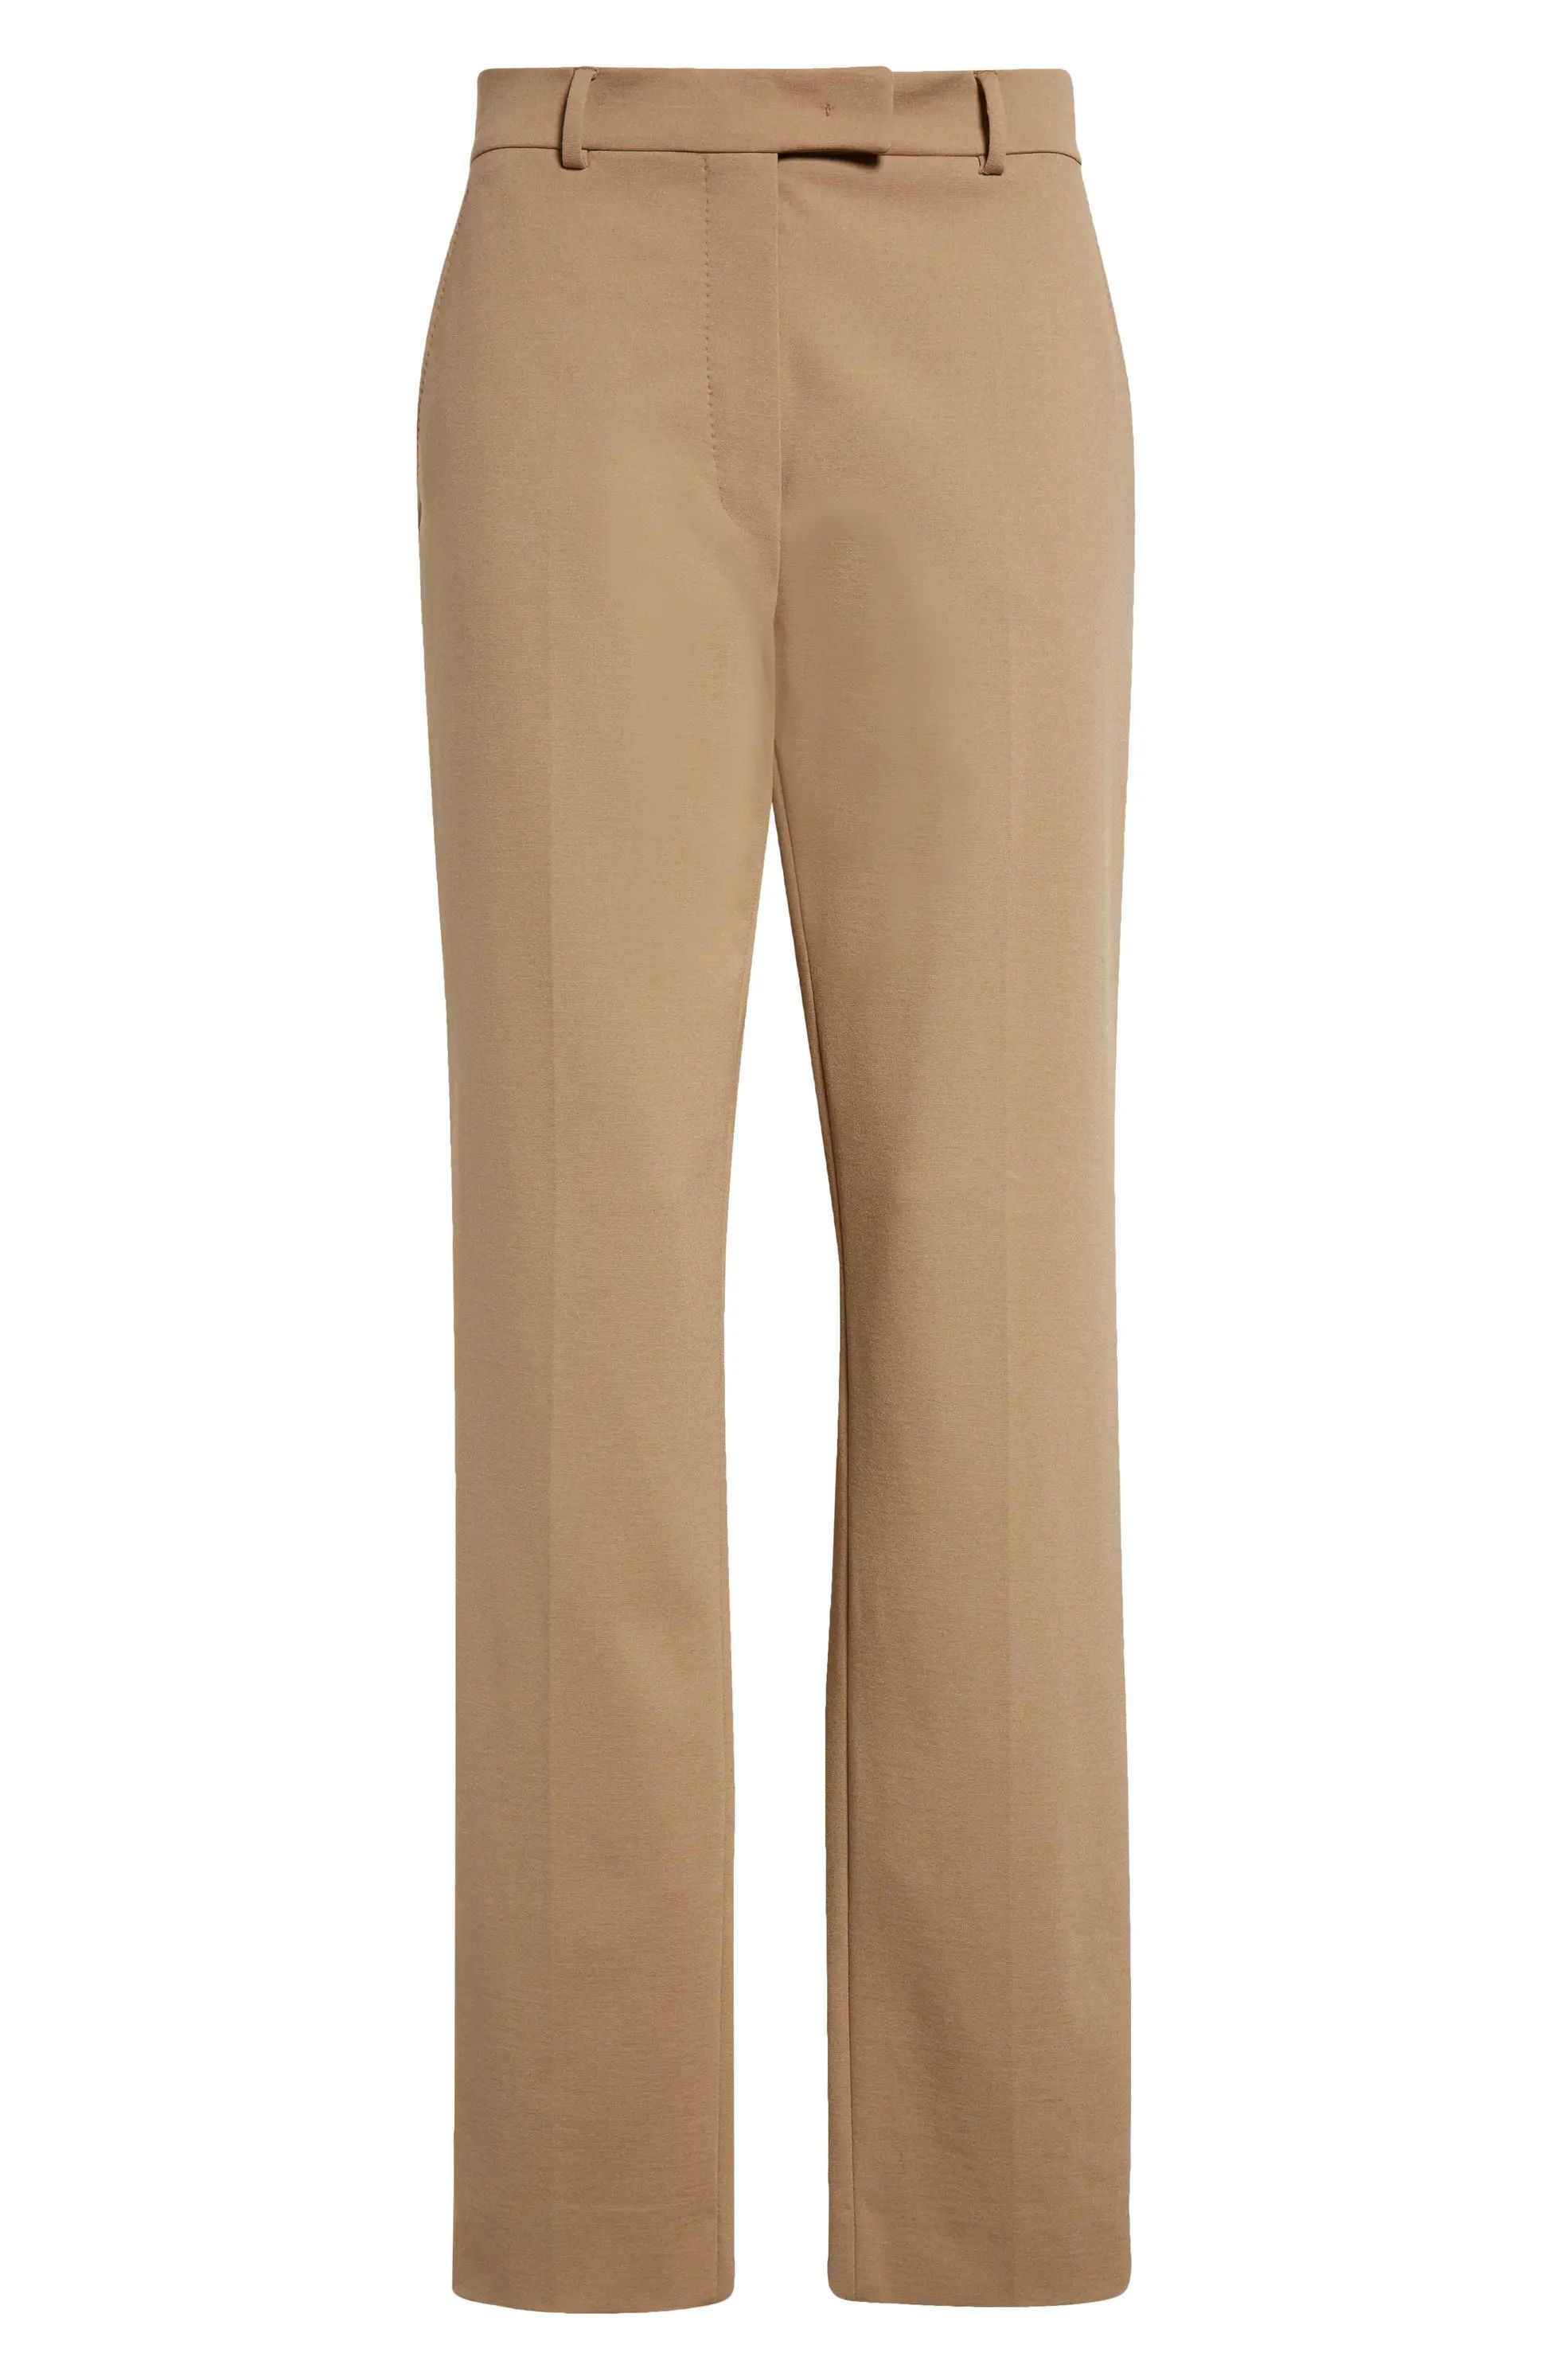 Max Mara Studio Ananas Stretch Jersey Ankle Trousers | Nordstrom | Nordstrom